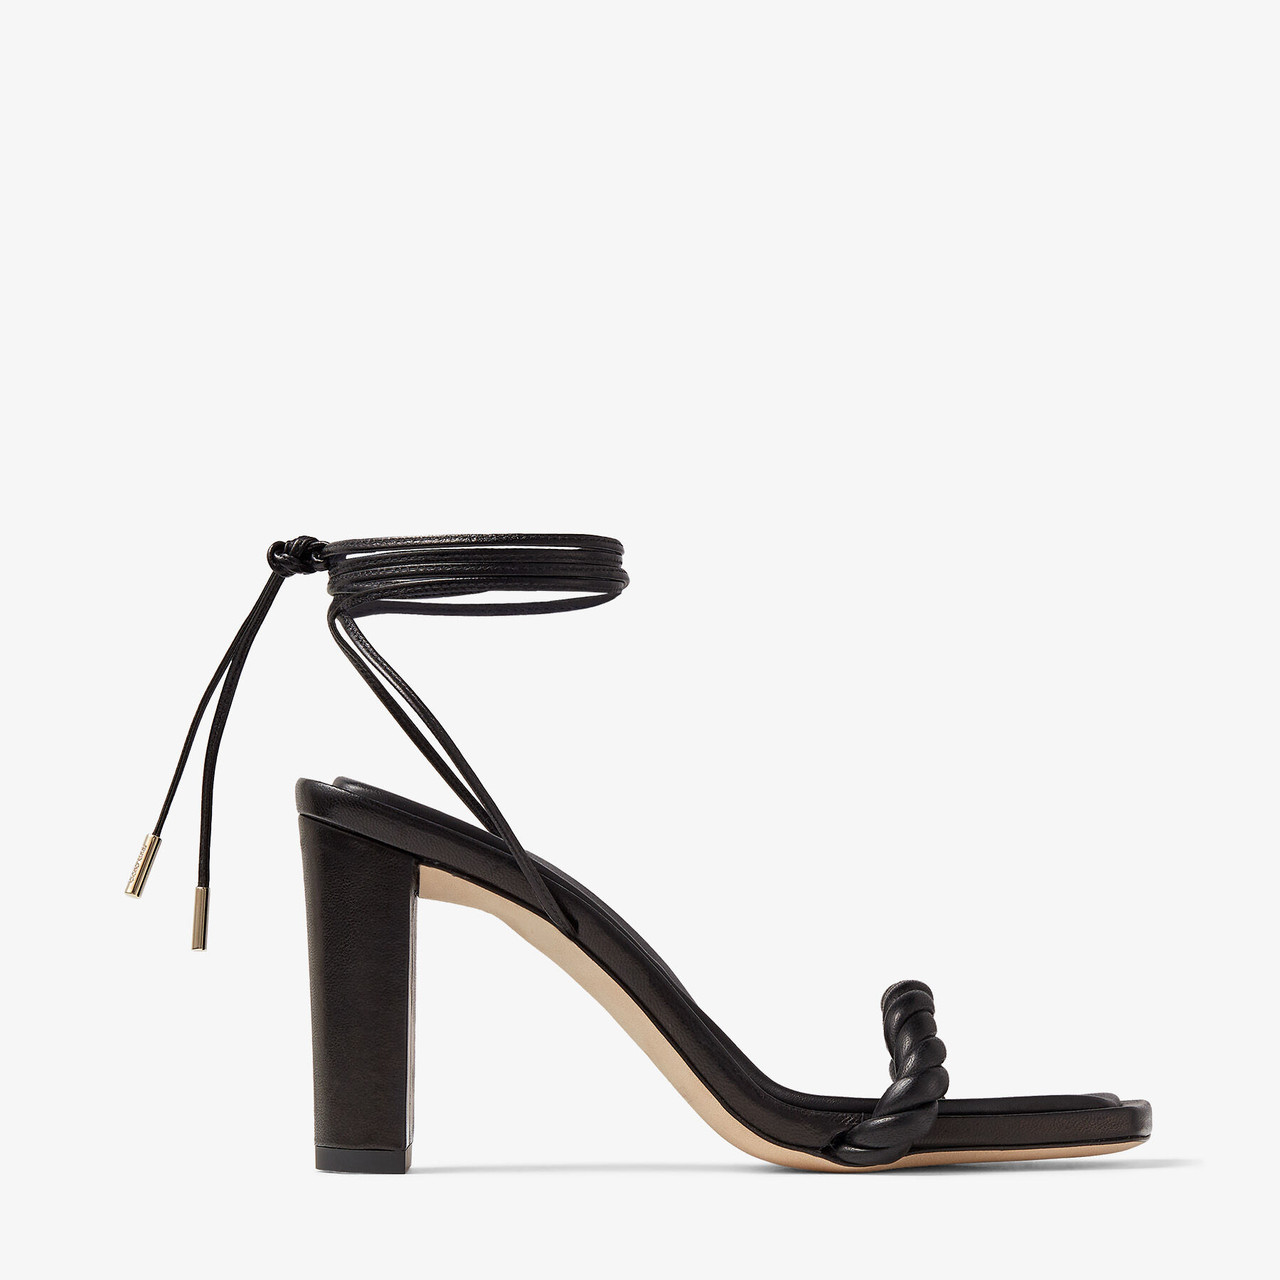 Jimmy Choo Diosa 85 Luxe Nappa Leather Sandals in Black